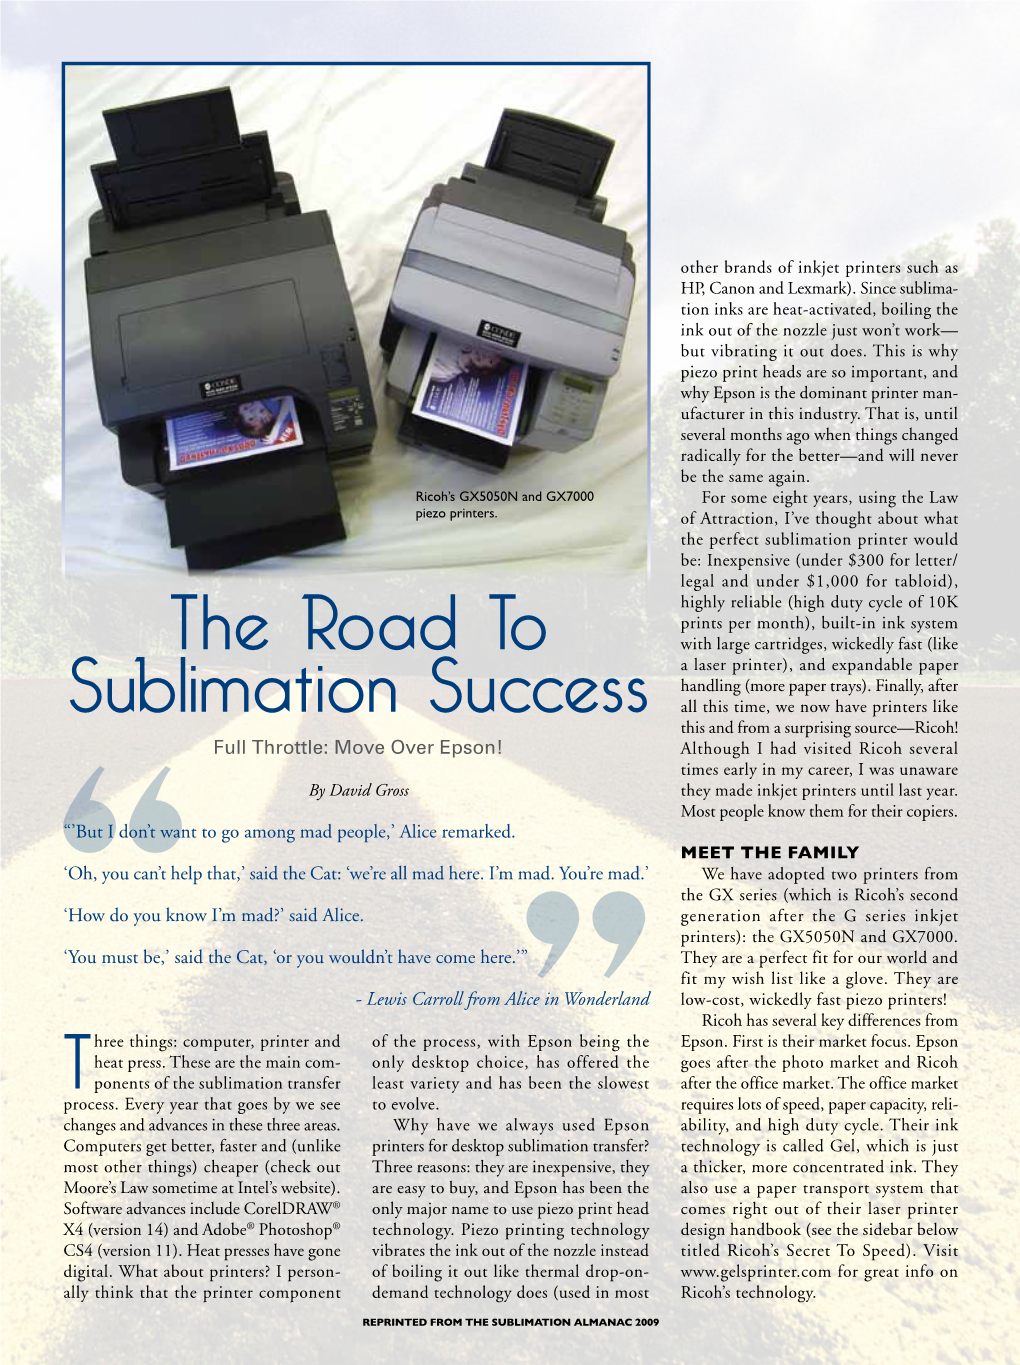 The Road to Sublimation Success